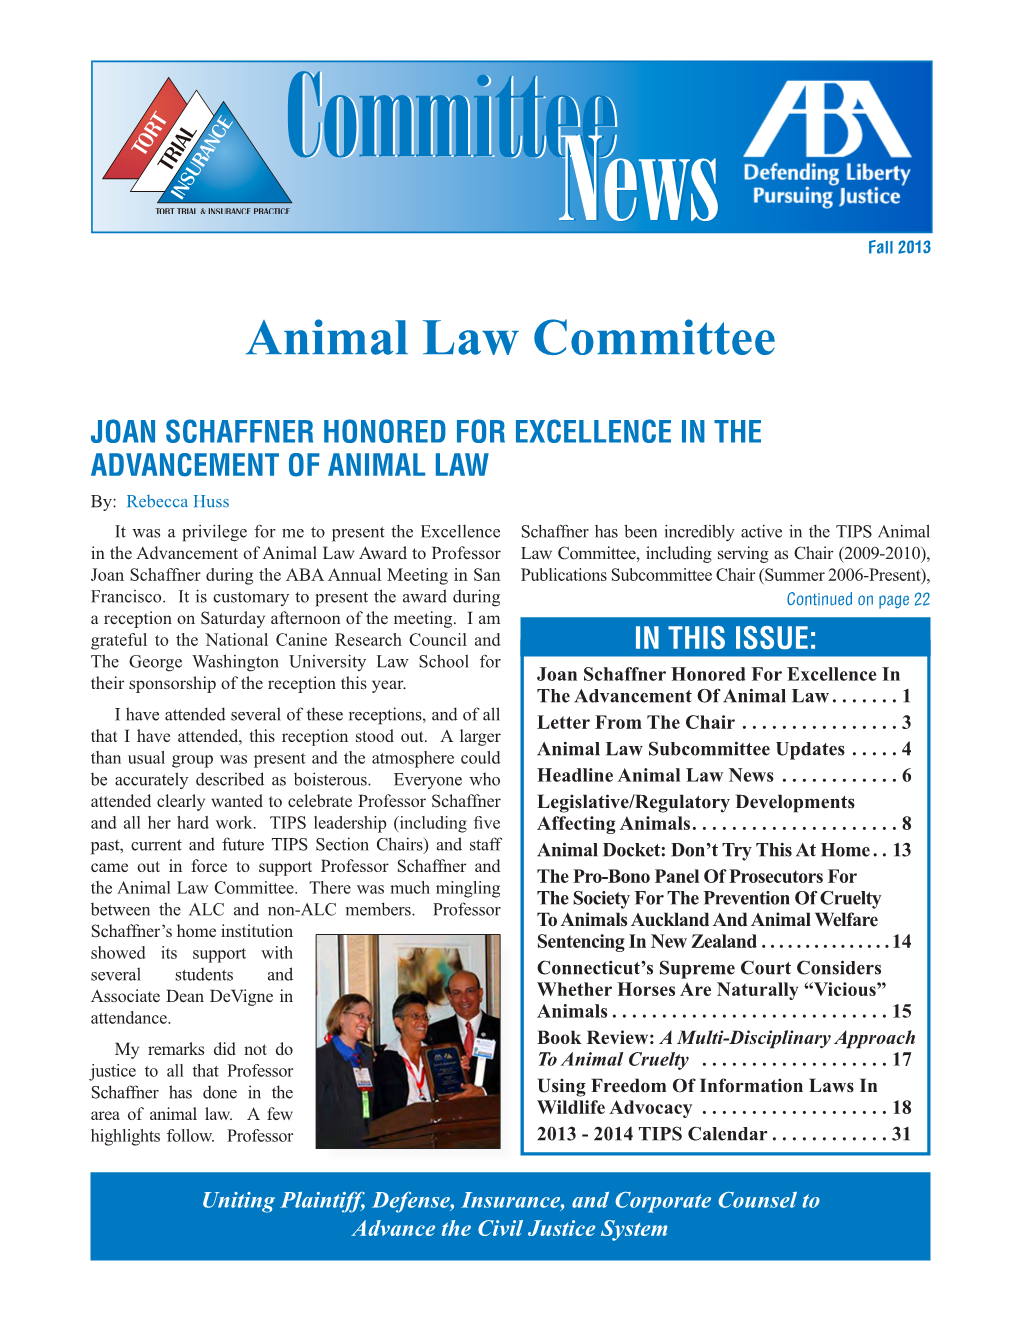 Animal Law Committee in THIS ISSUE